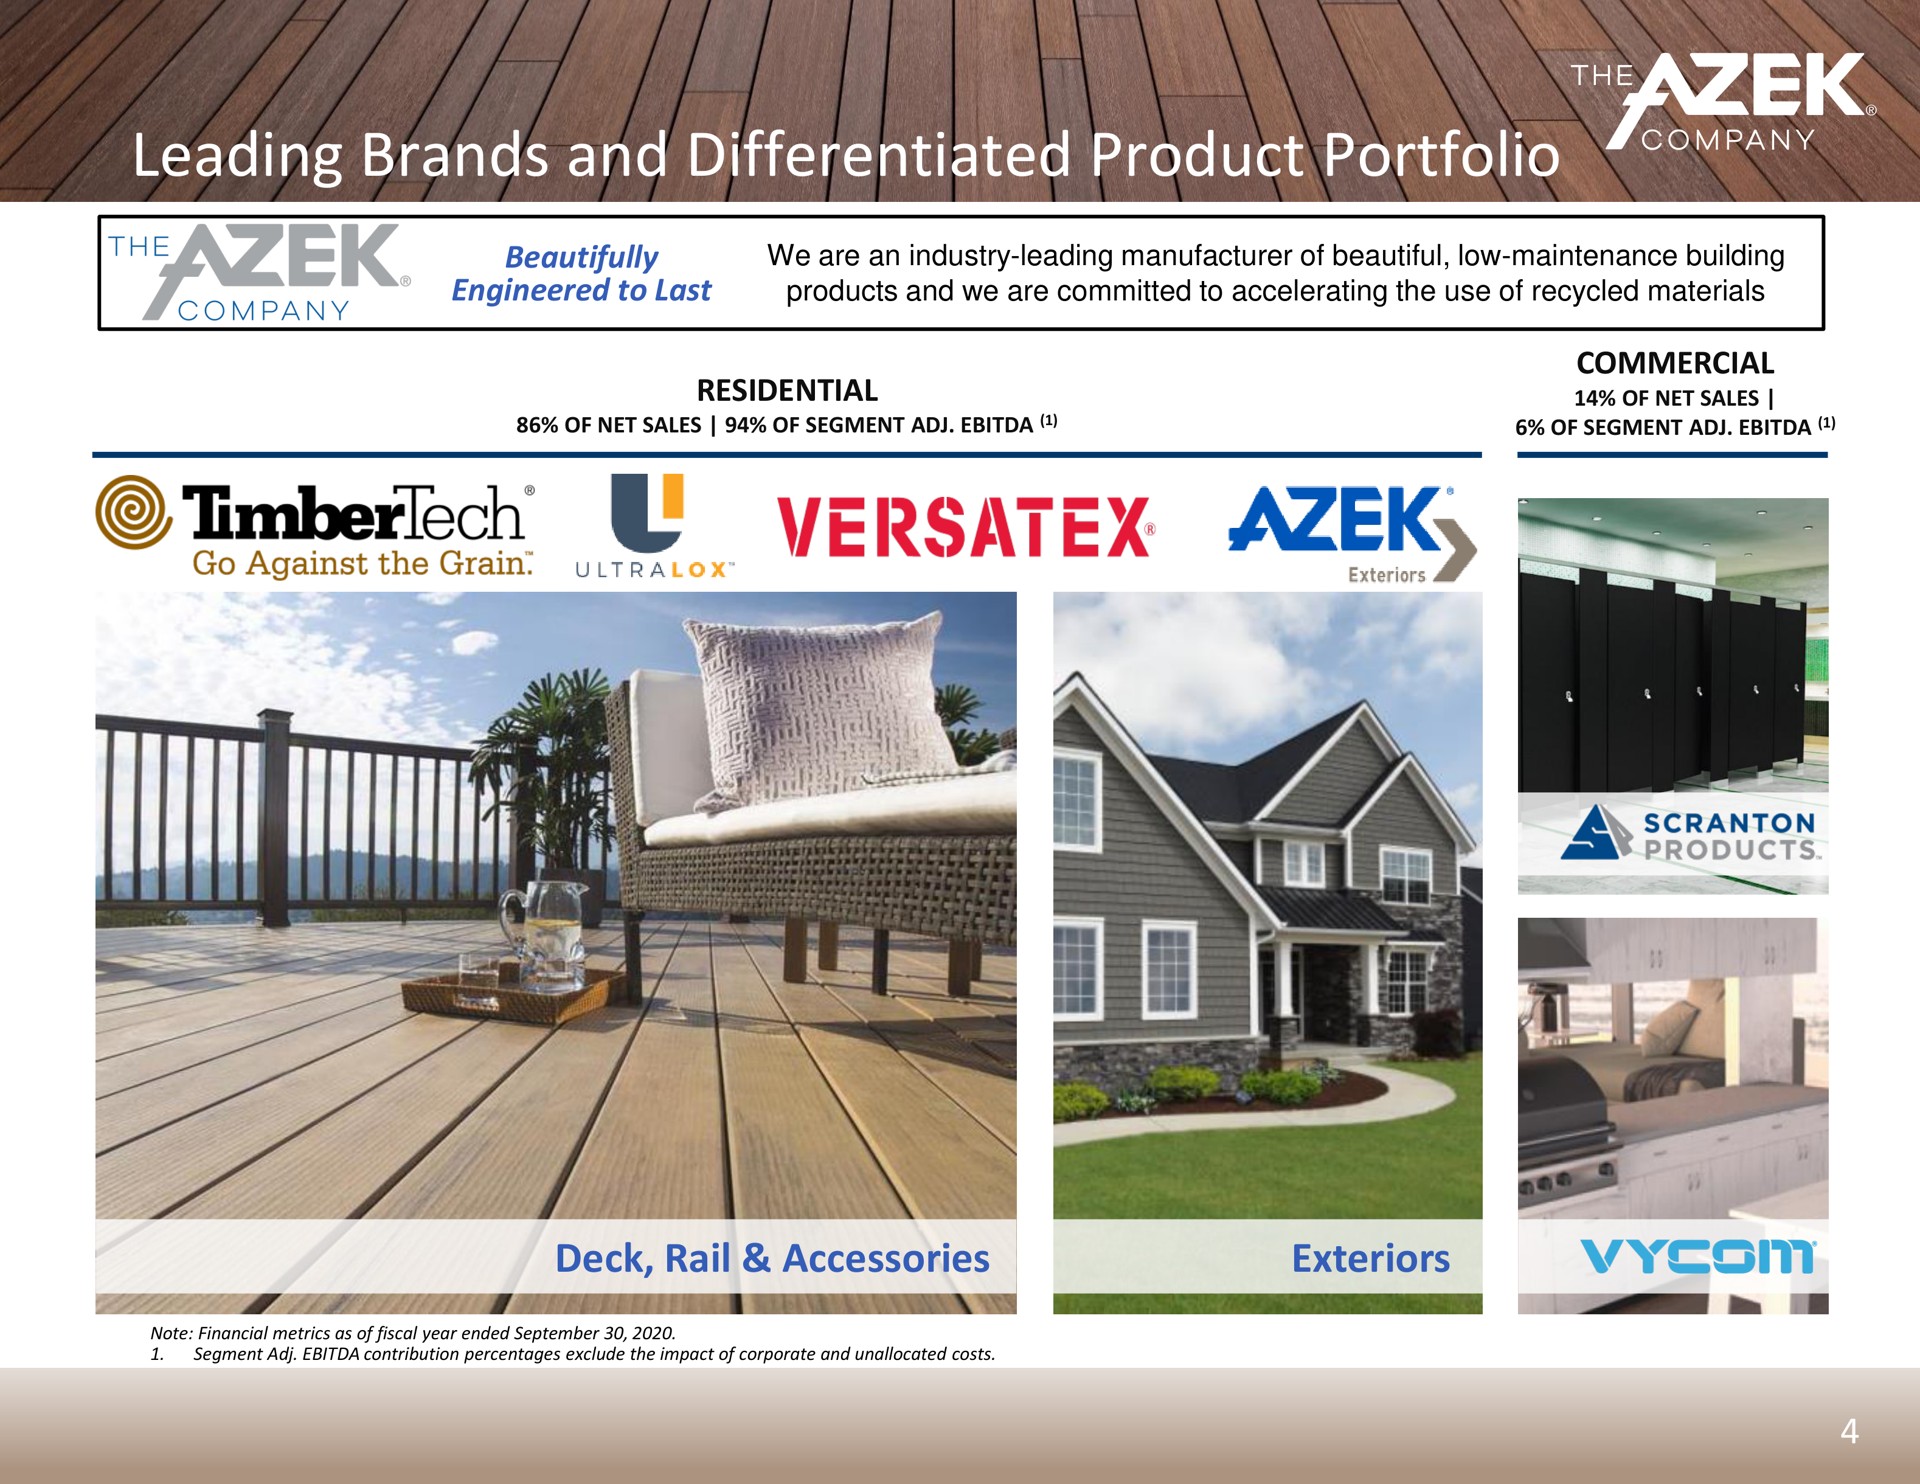 leading brands and differentiated product portfolio deck rail accessories exteriors poh | Azek